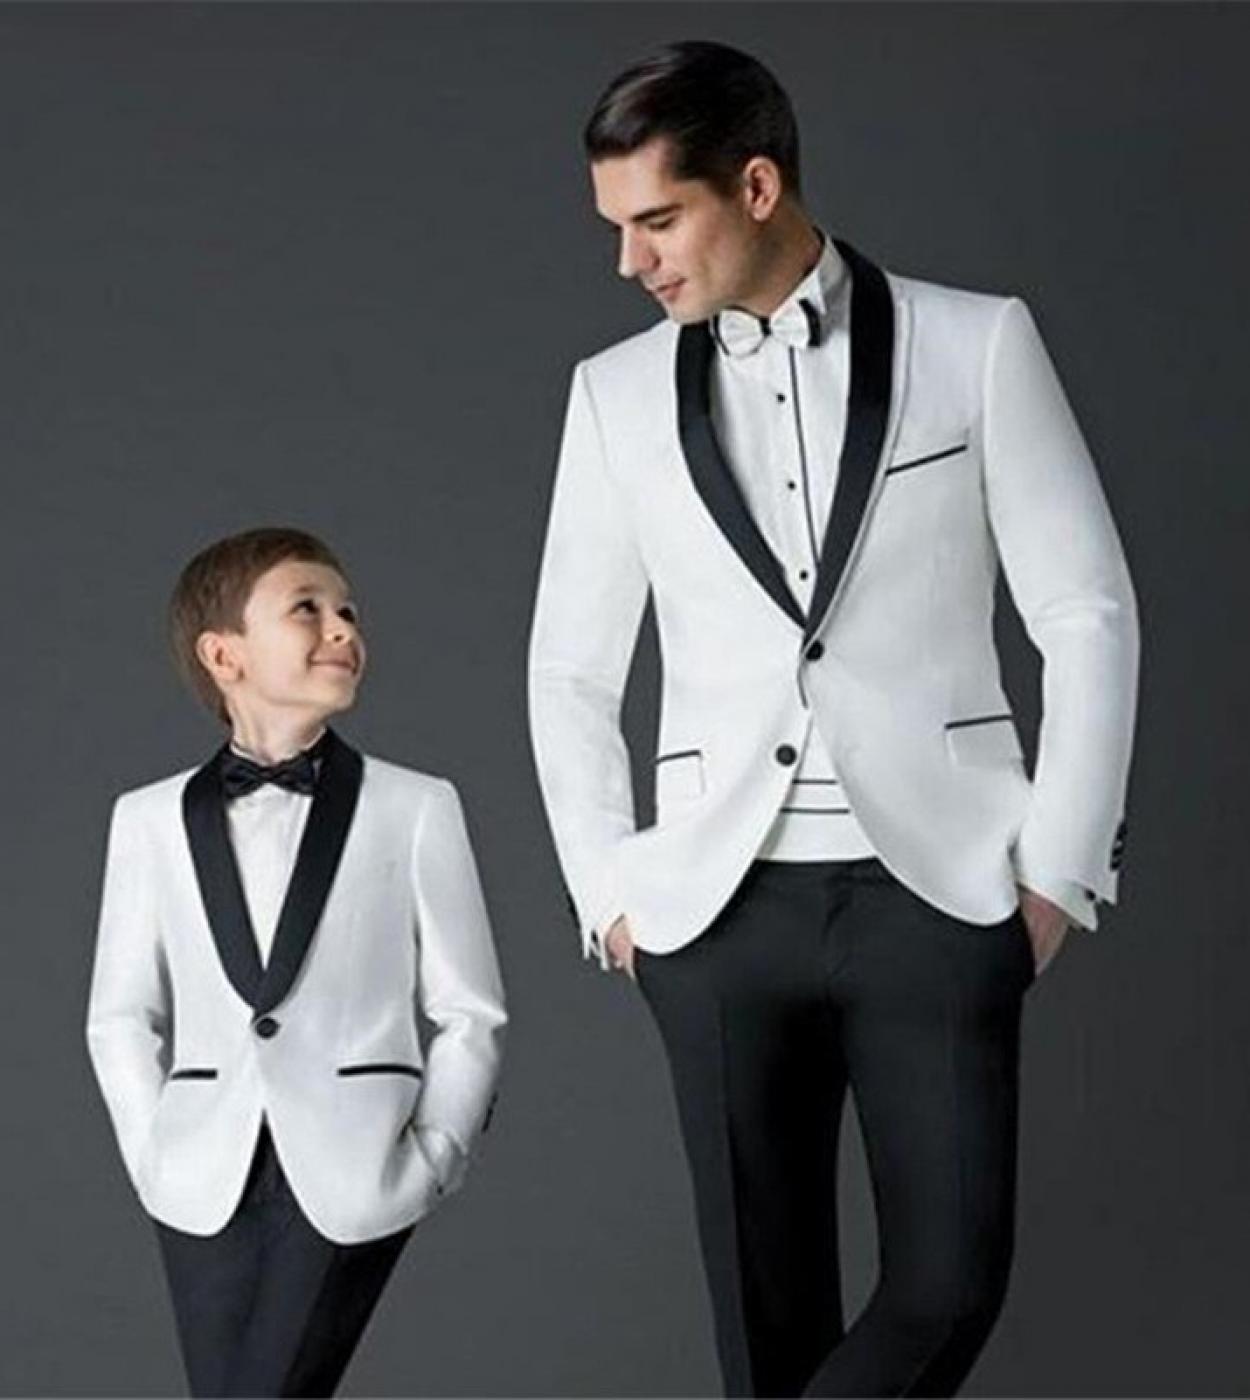 2022 New Boys Suits For Weddings Children Suit New Blackwhite Kid Wedding Prom Suits Blazers For Boys Tuxedojacketpan